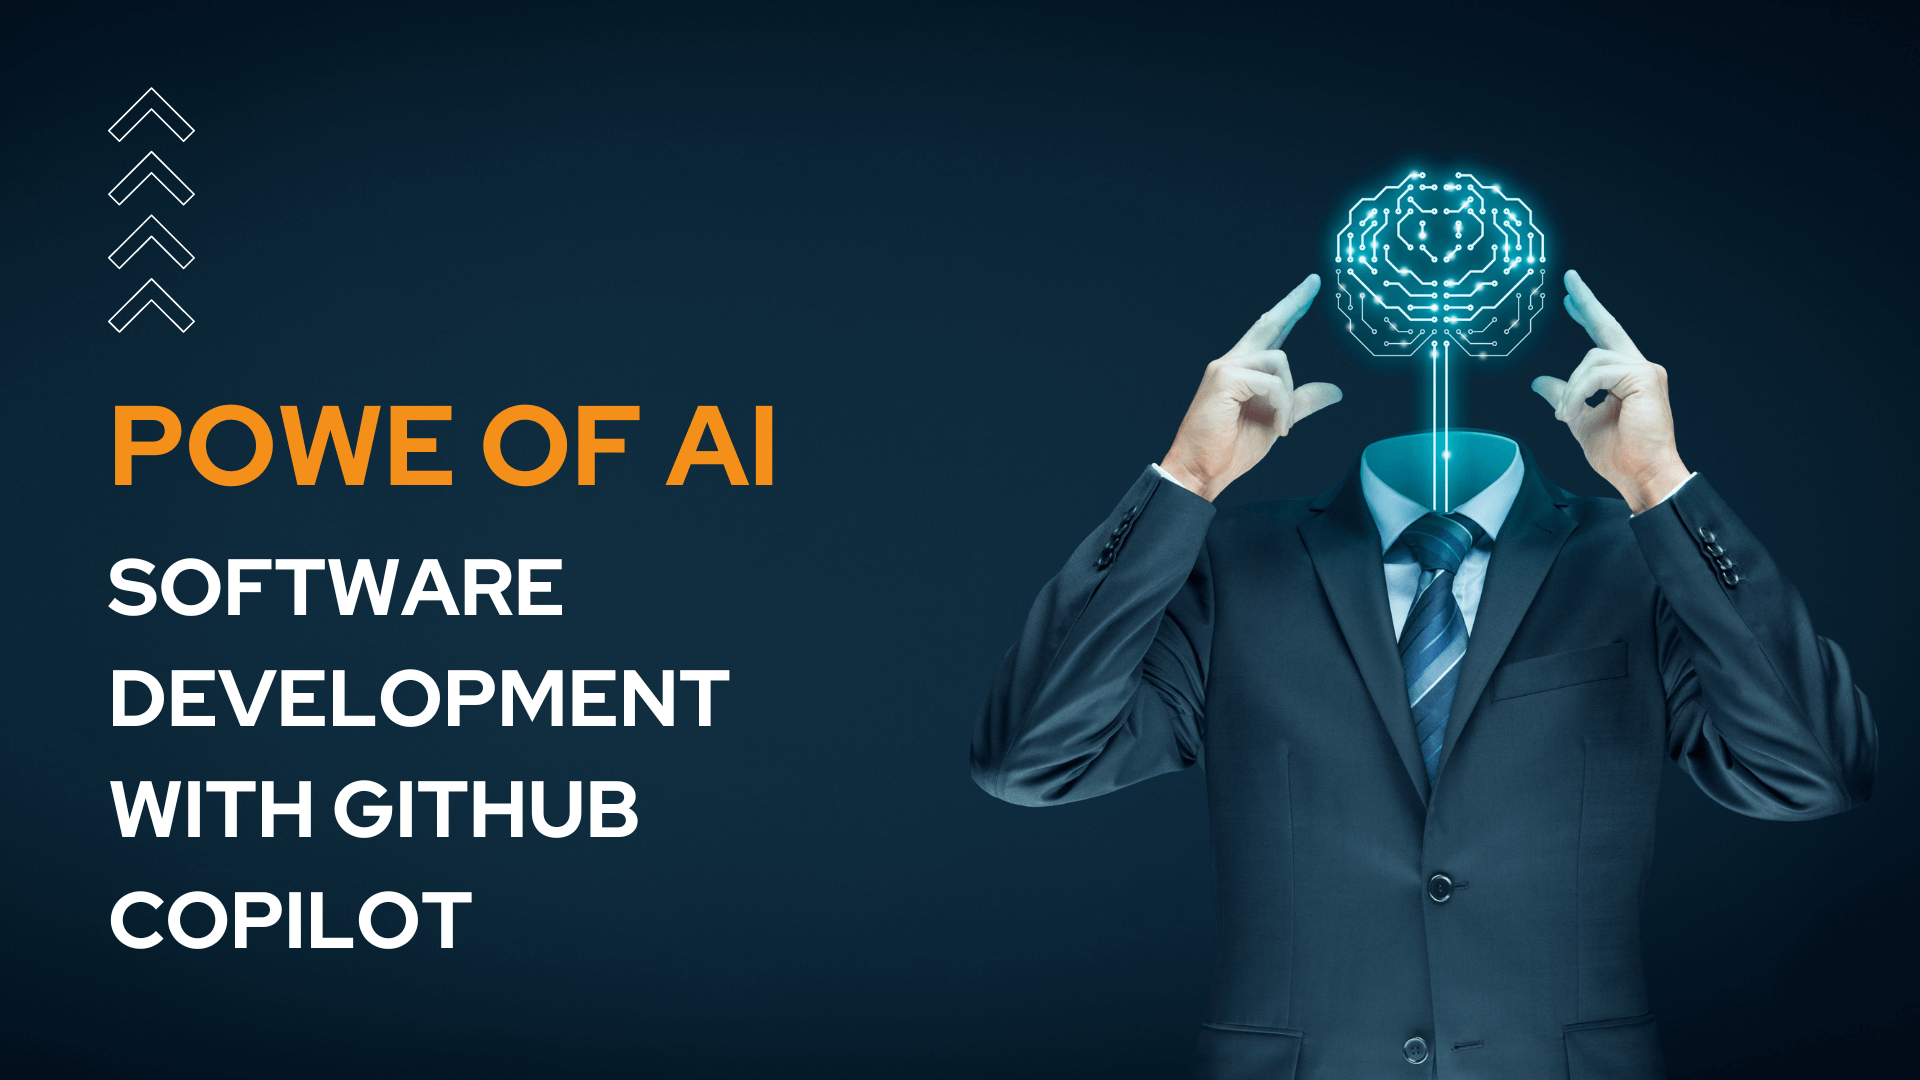 Power of AI: Software development with GitHub Copilot